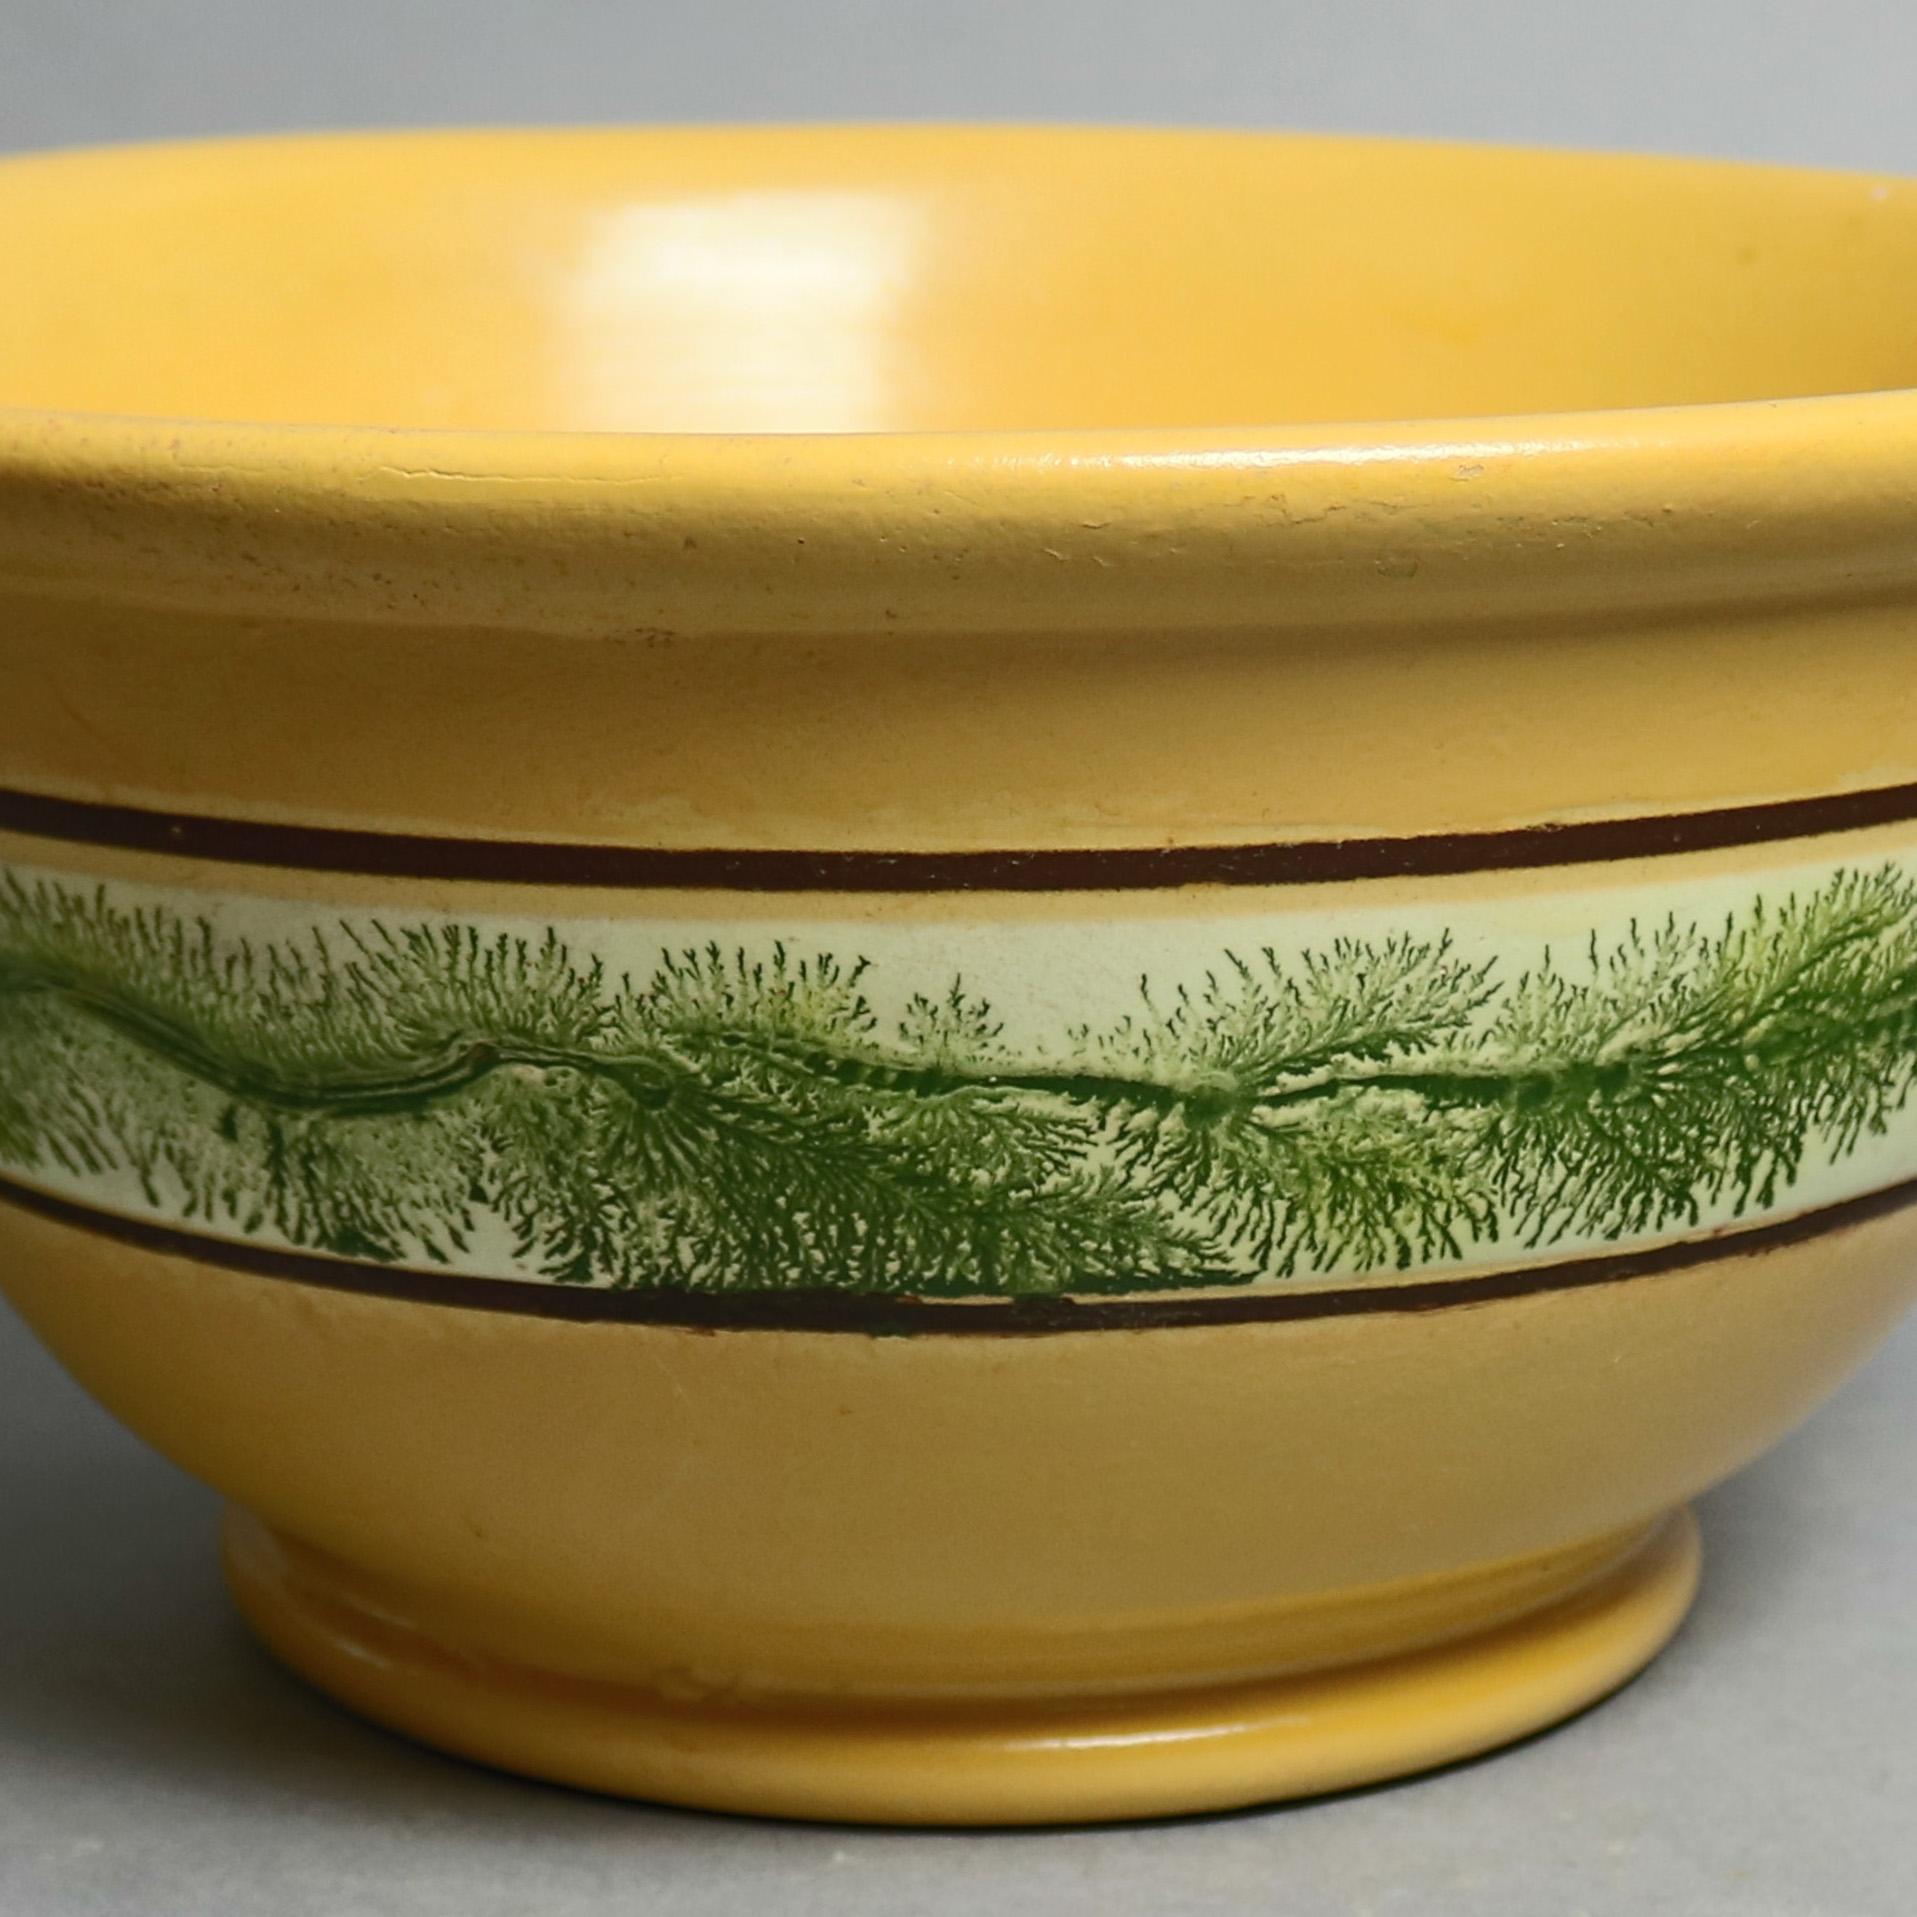 Mocha yellow ware mixing bowl by East Knoll Pottery features flared form with band of feathered decoration, maker mark impressed in base, 20th century


Measures - 13.5